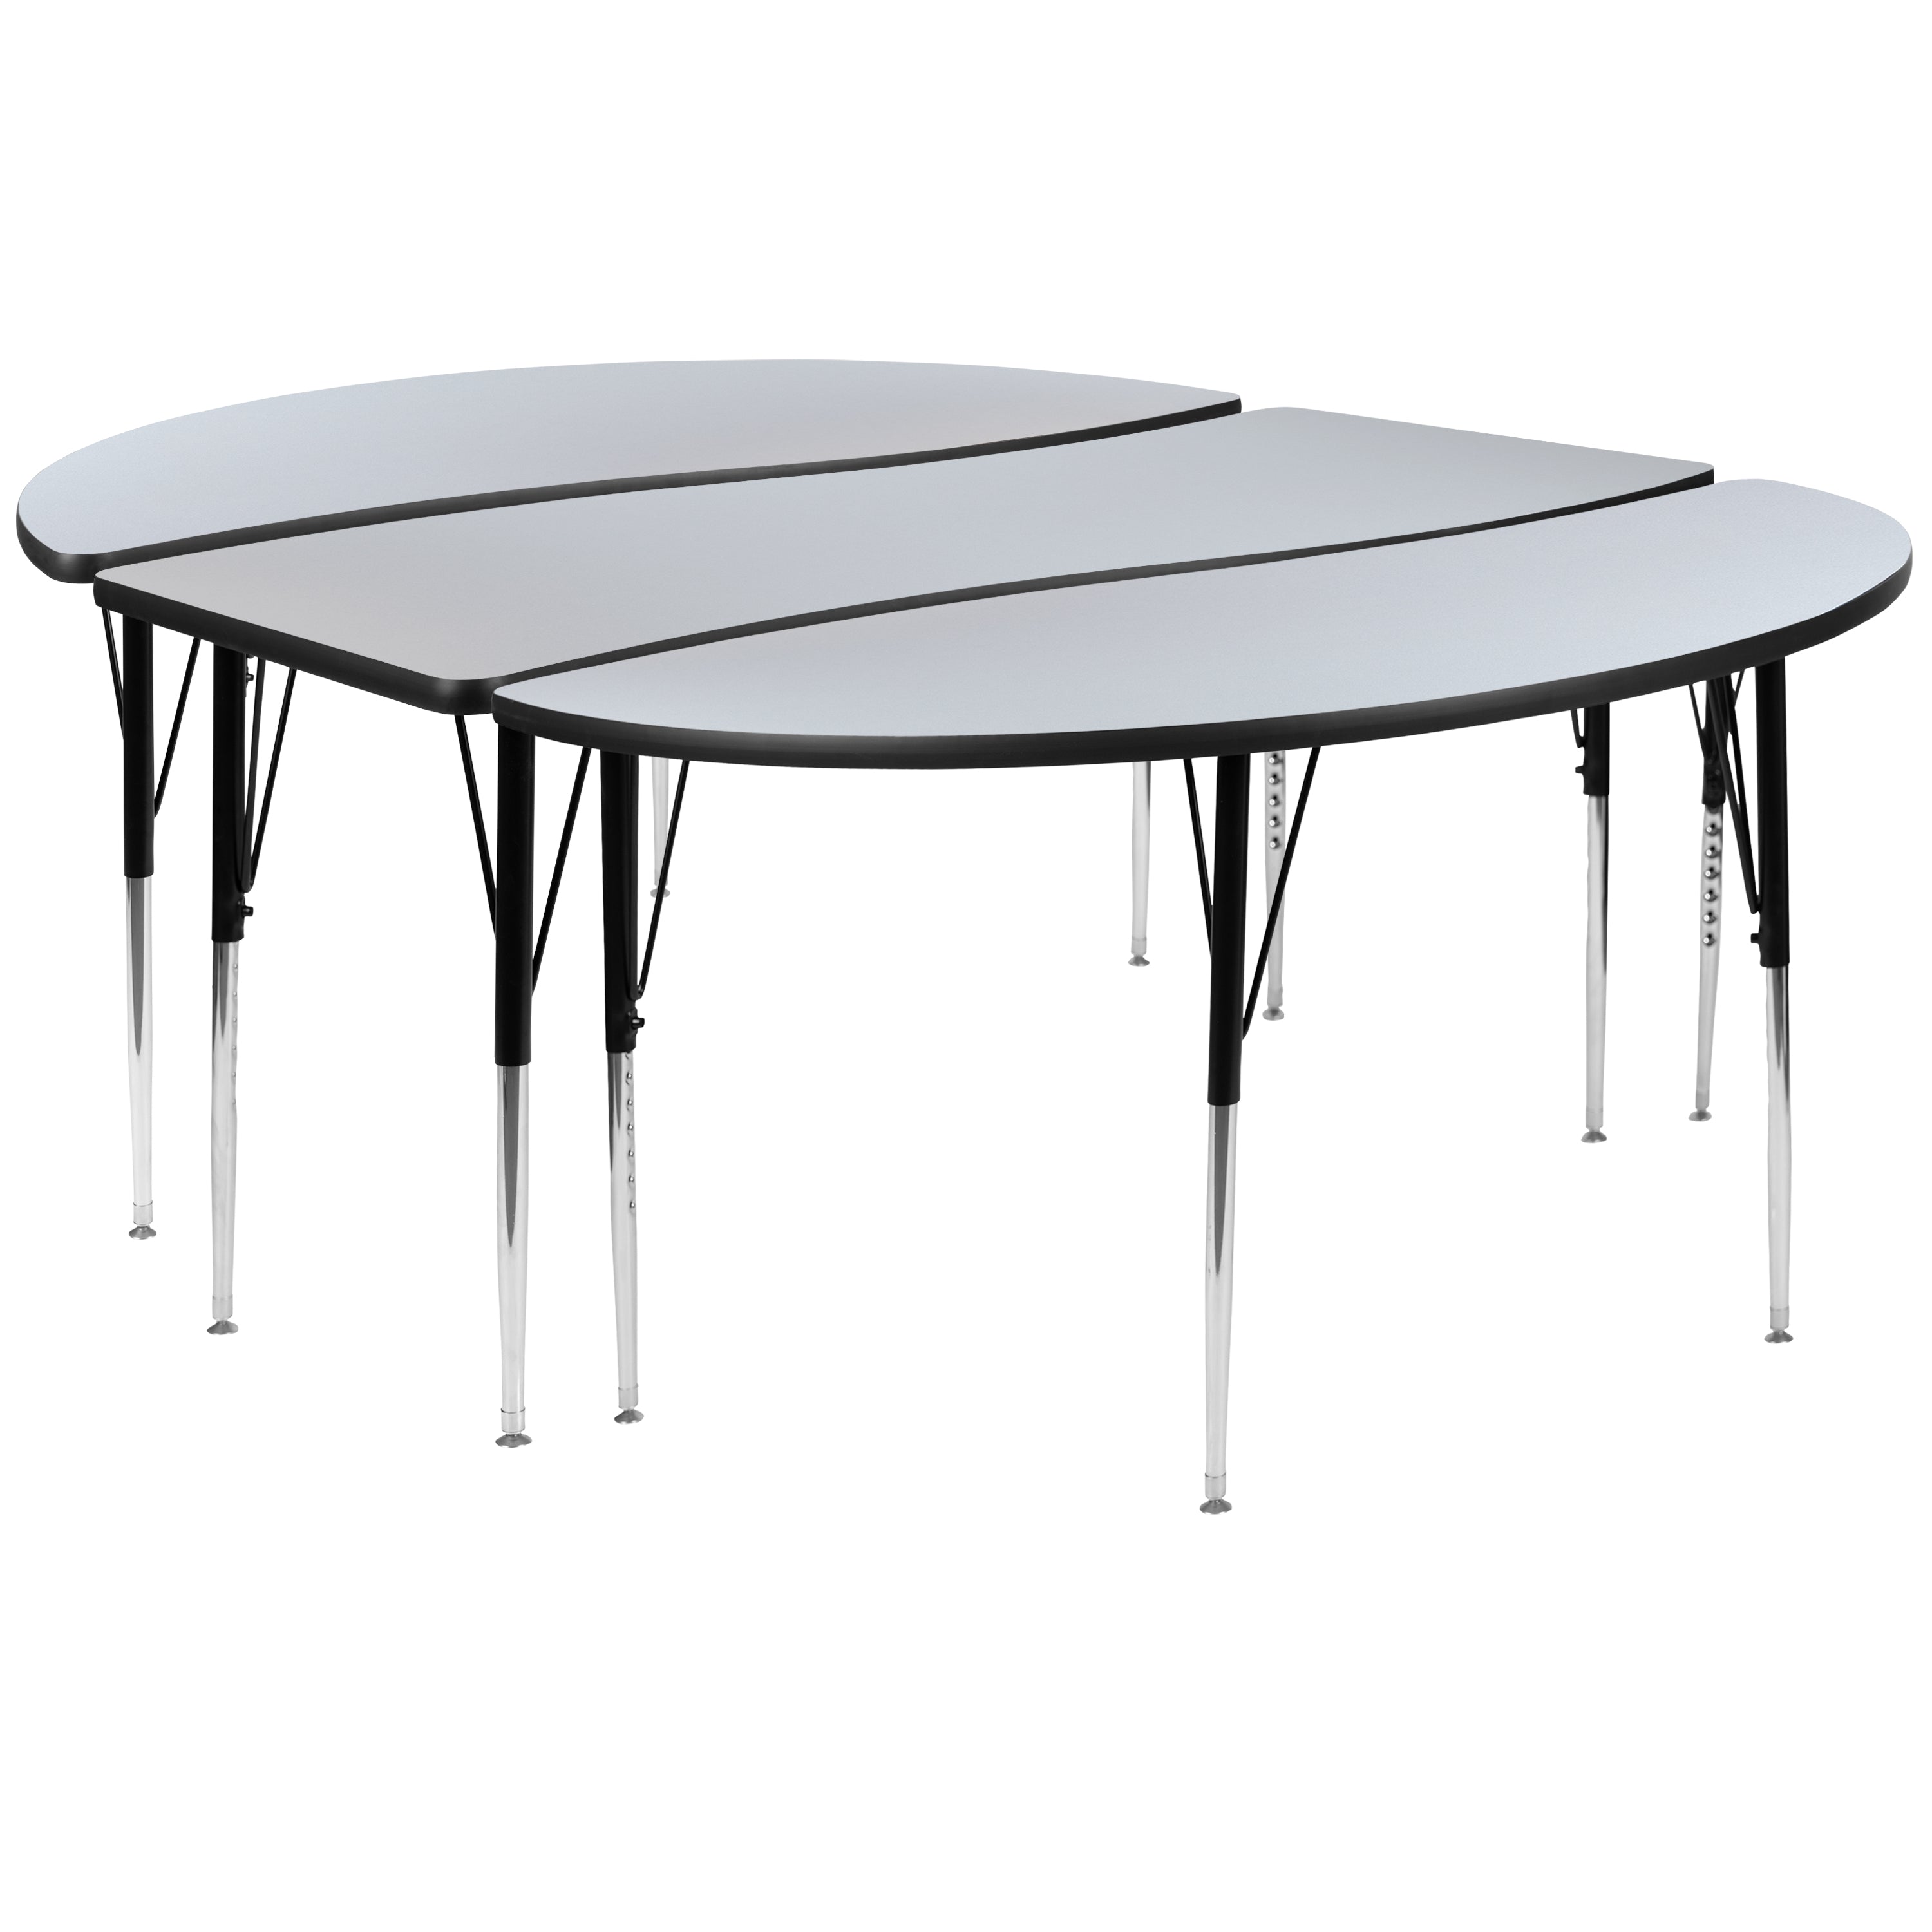 3 Piece 86" Oval Wave Flexible Grey Thermal Laminate Activity Table Set - Standard Height Adjustable Legs-Collaborative Activity Table Set-Flash Furniture-Wall2Wall Furnishings